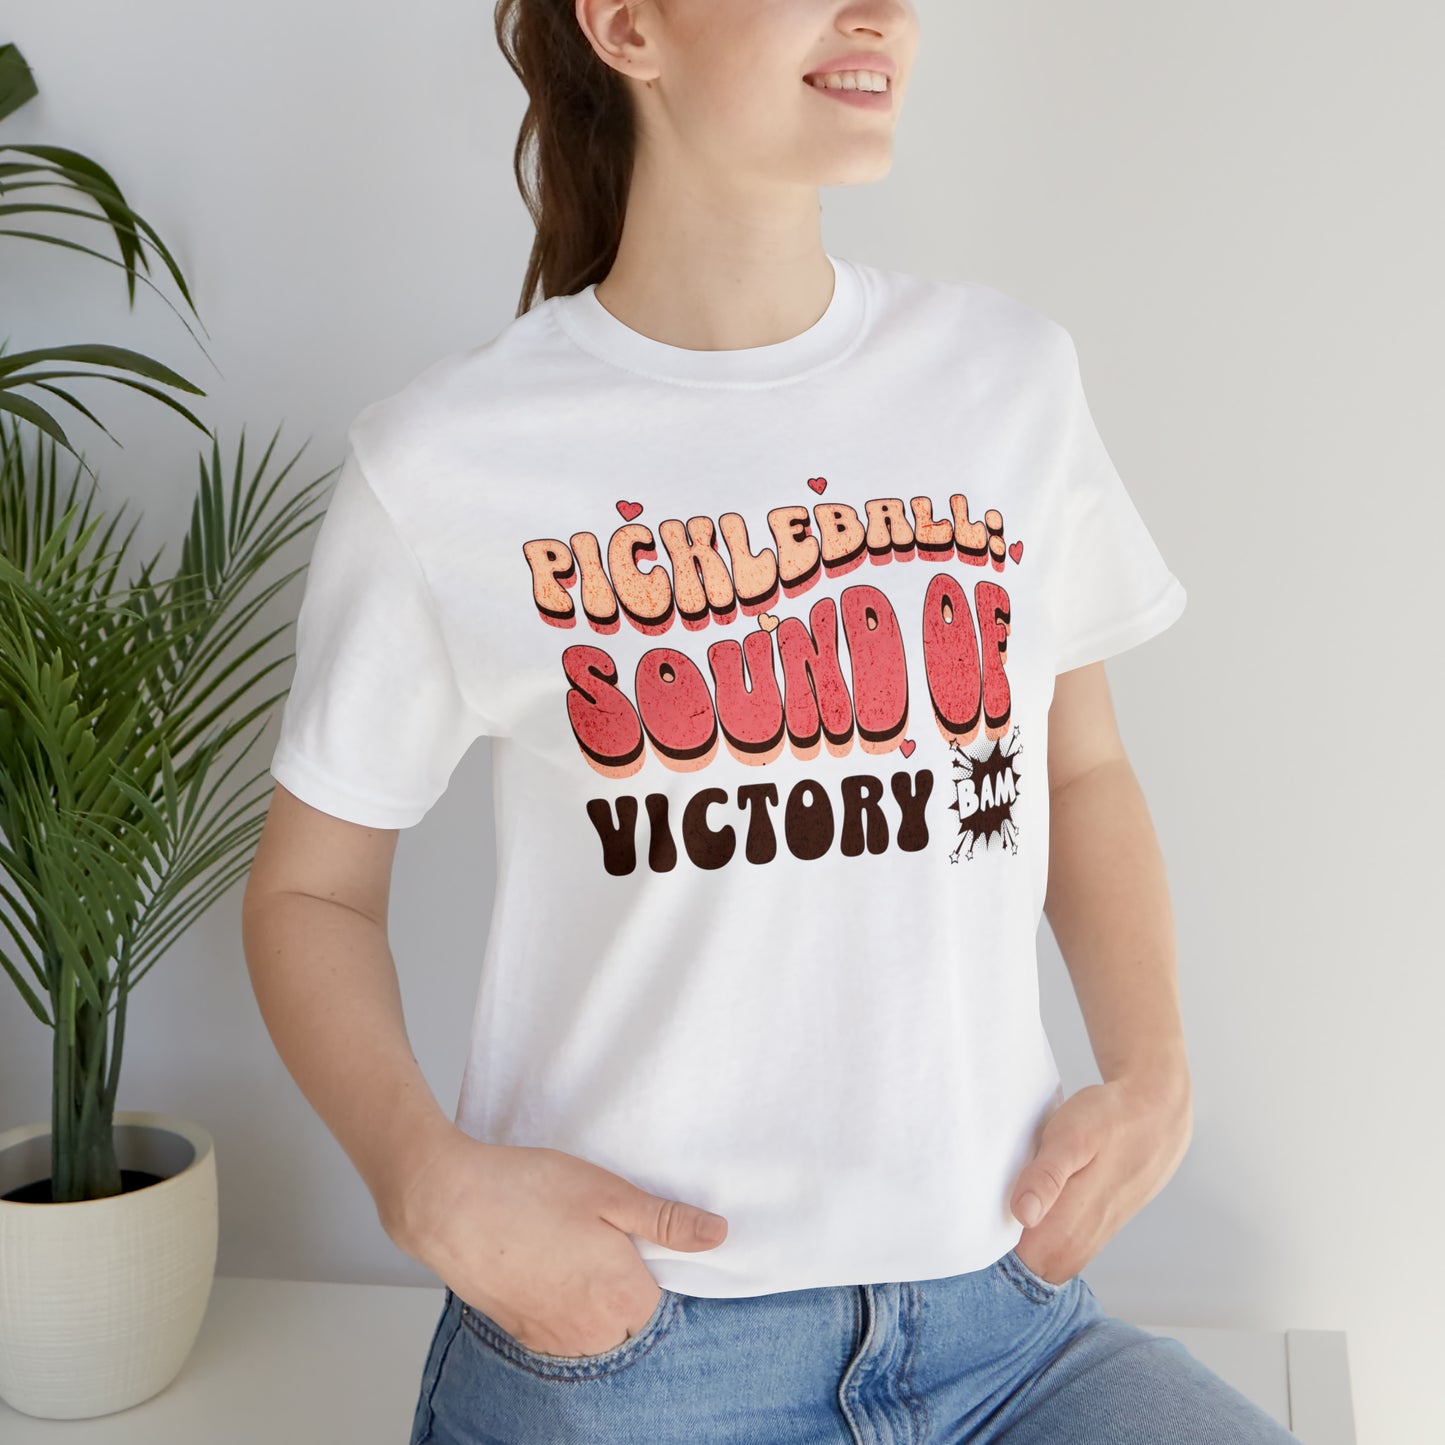 Pickleball: Sound of Victory T-Shirt